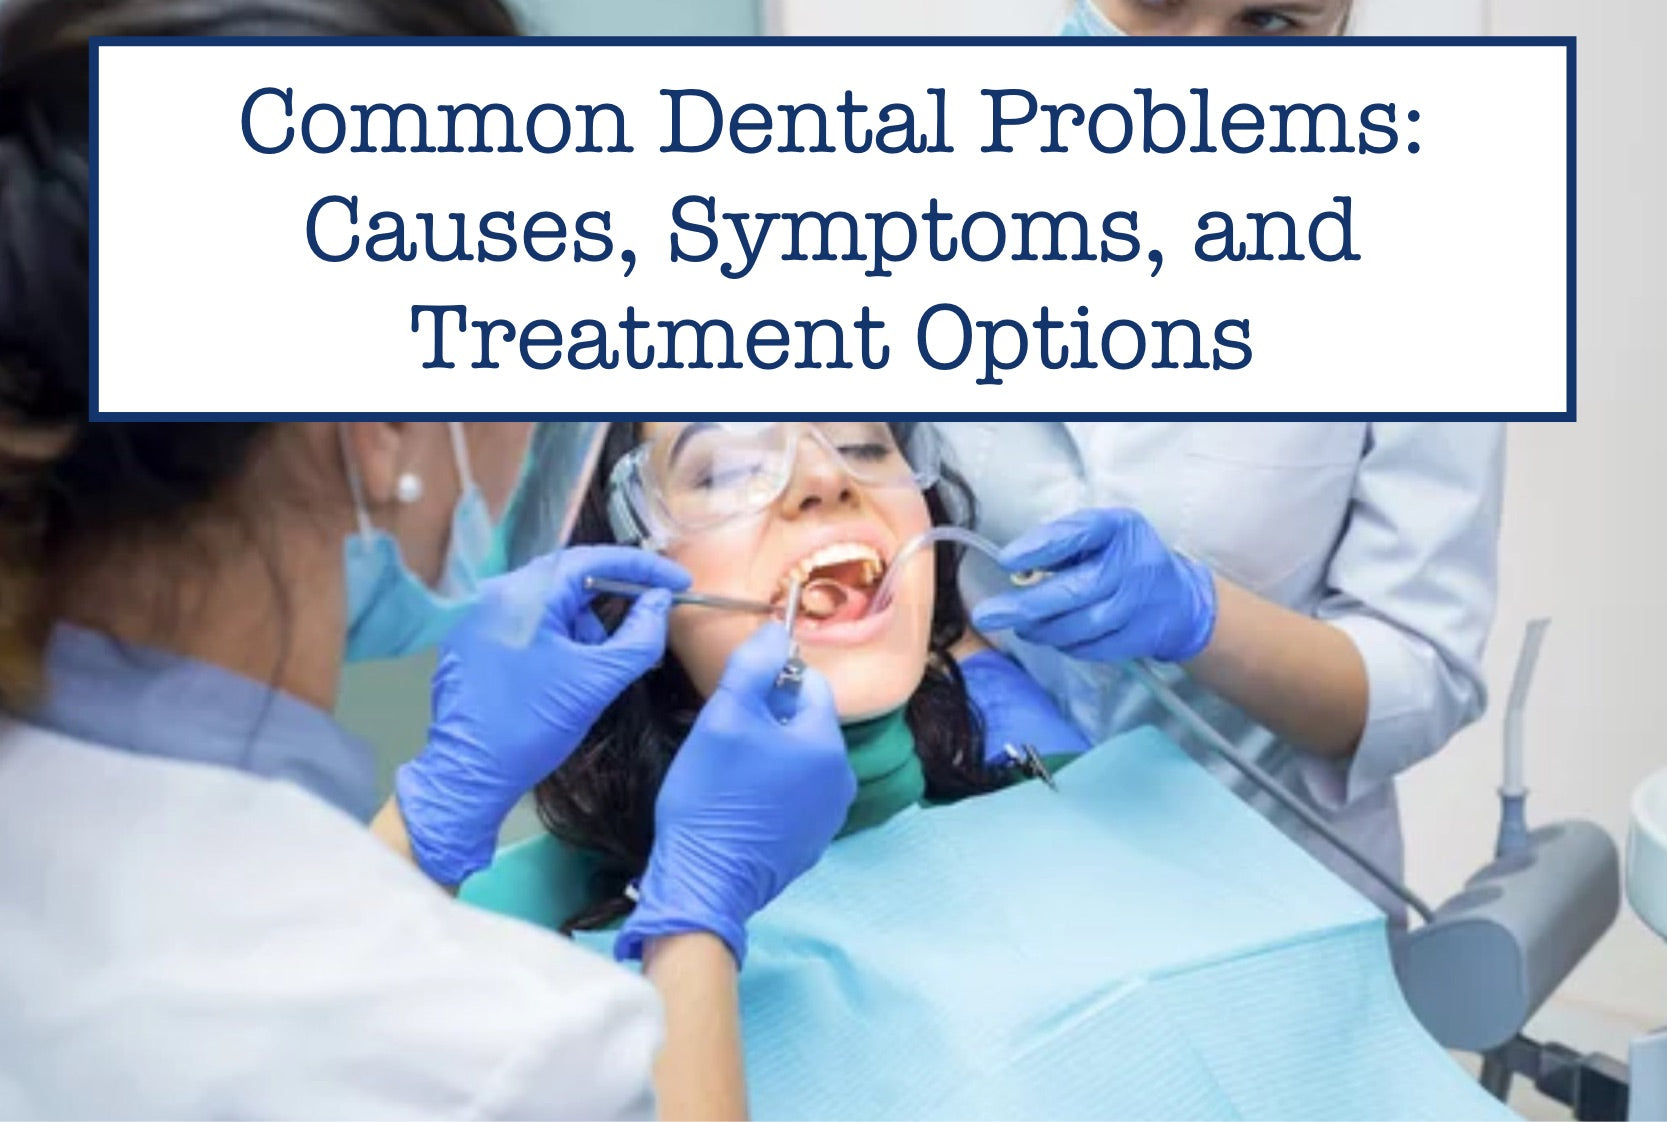 Common Dental Problems: Causes, Symptoms, and Treatment Options